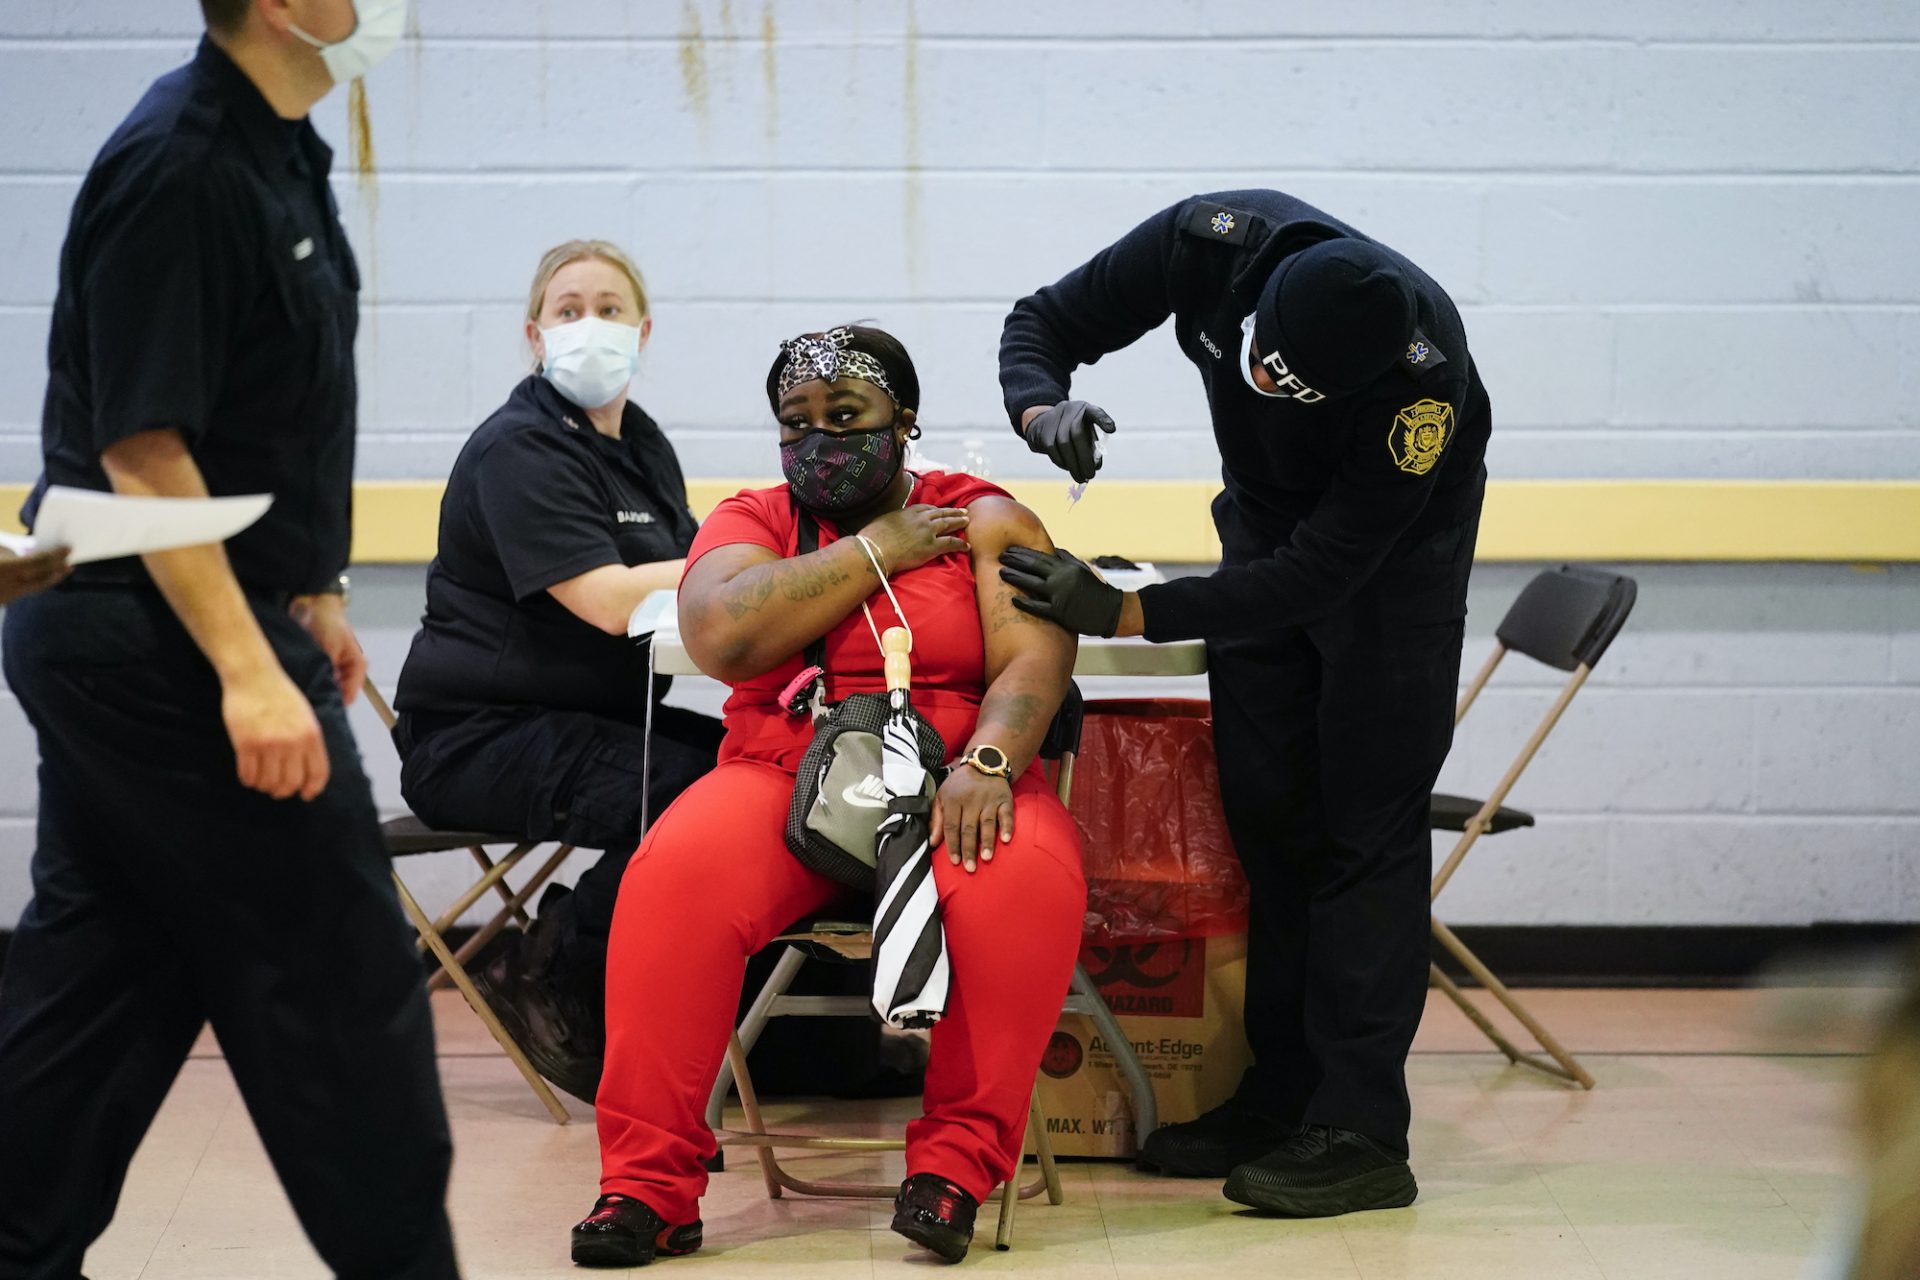 A member of the Philadelphia Fire Department administers the Johnson & Johnson COVID-19 vaccine to a woman at a vaccination site setup at a Salvation Army location in Philadelphia, Friday, March 26, 2021.